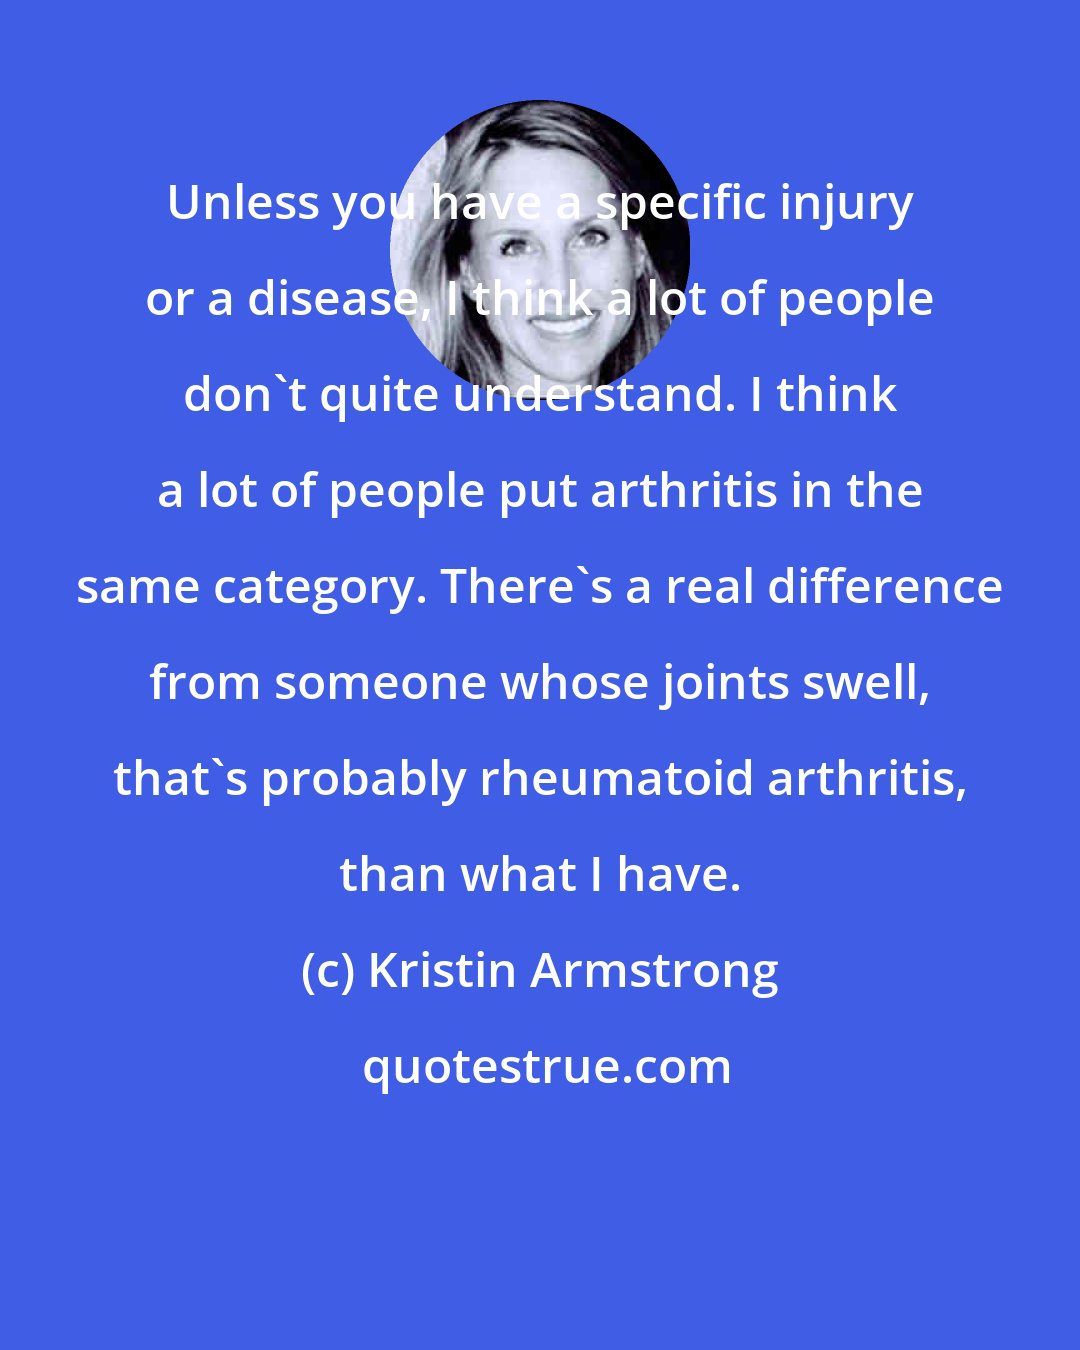 Kristin Armstrong: Unless you have a specific injury or a disease, I think a lot of people don't quite understand. I think a lot of people put arthritis in the same category. There's a real difference from someone whose joints swell, that's probably rheumatoid arthritis, than what I have.